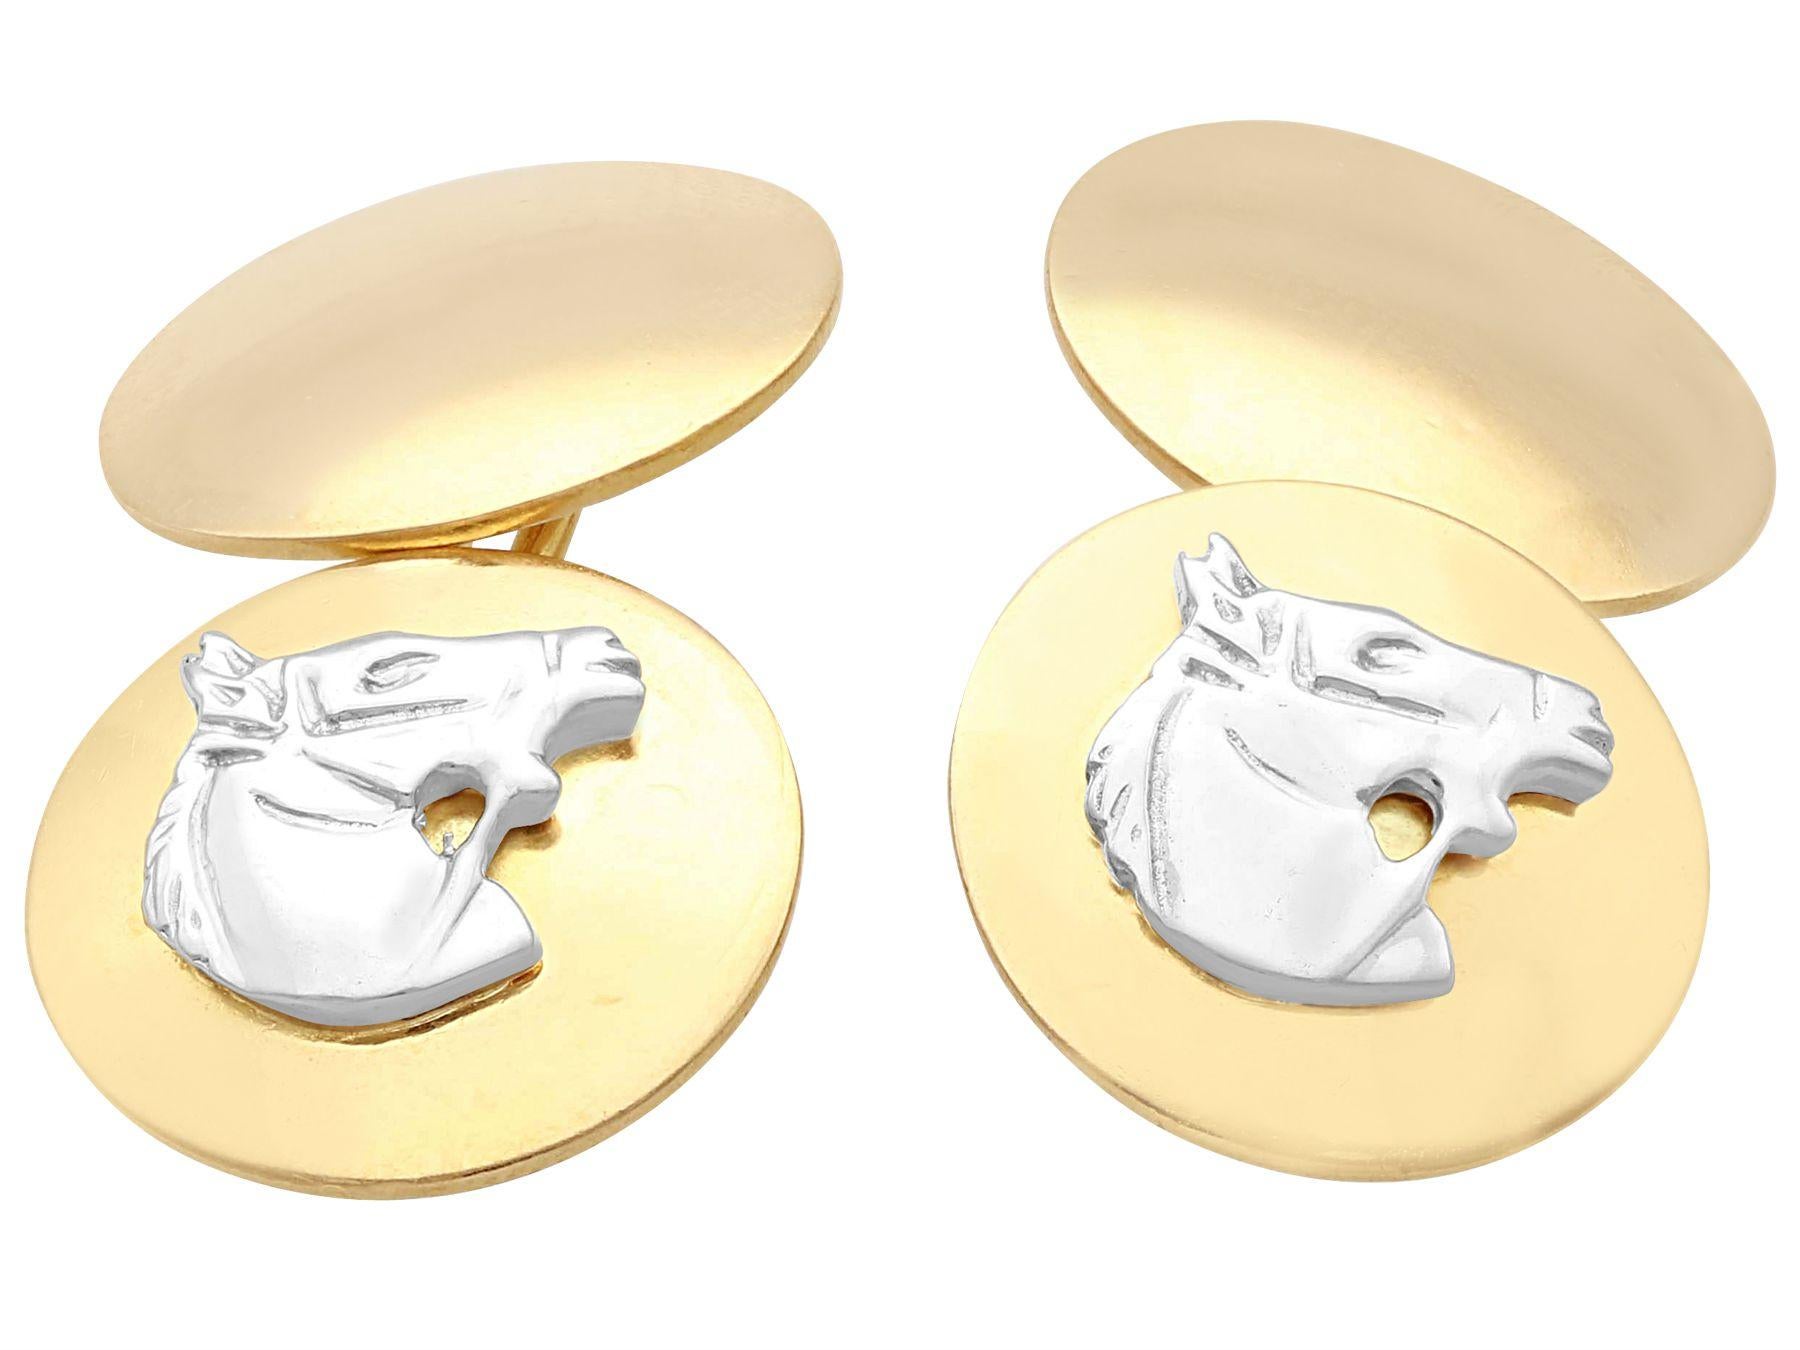 A fine and impressive pair of vintage 18k yellow and white gold equestrian cufflinks; part of our men's jewelry and estate jewelry collections.

These fine and impressive horse cufflinks have been crafted in 18k yellow gold.

The cufflinks have a